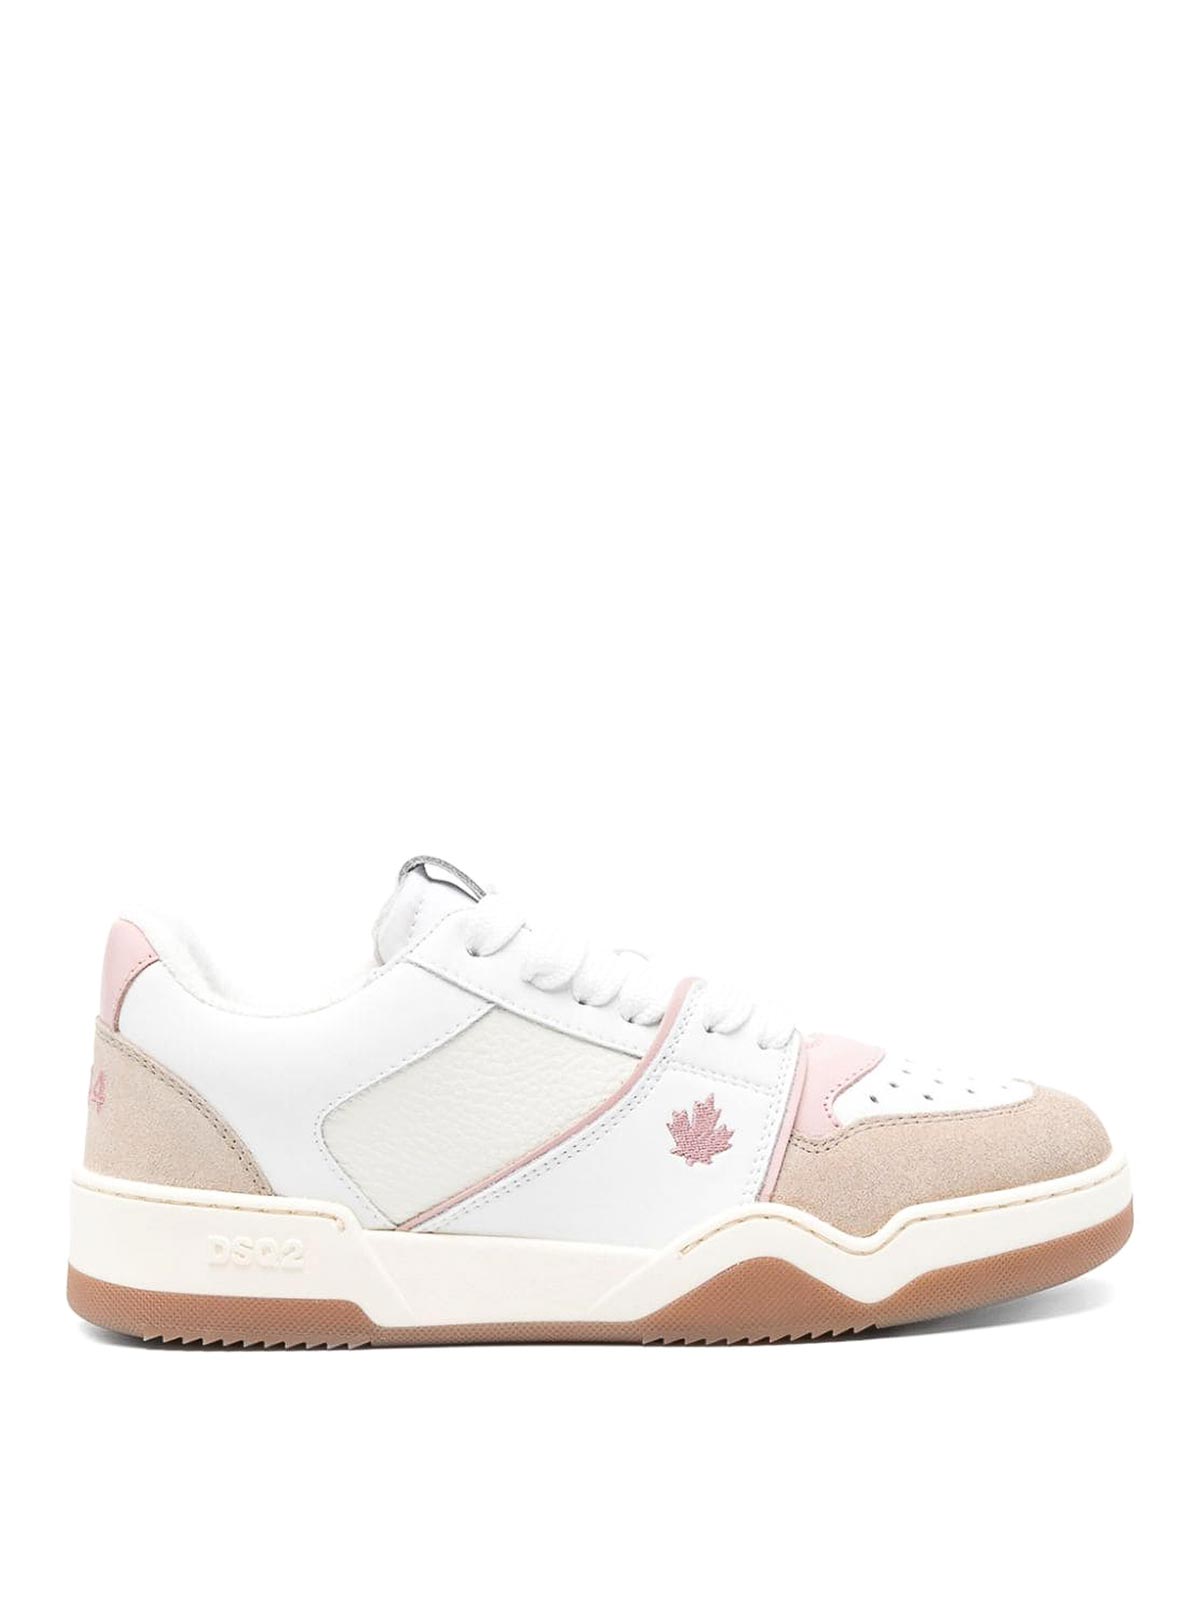 DSQUARED2 SPIKER LEATHER SNEAKERS